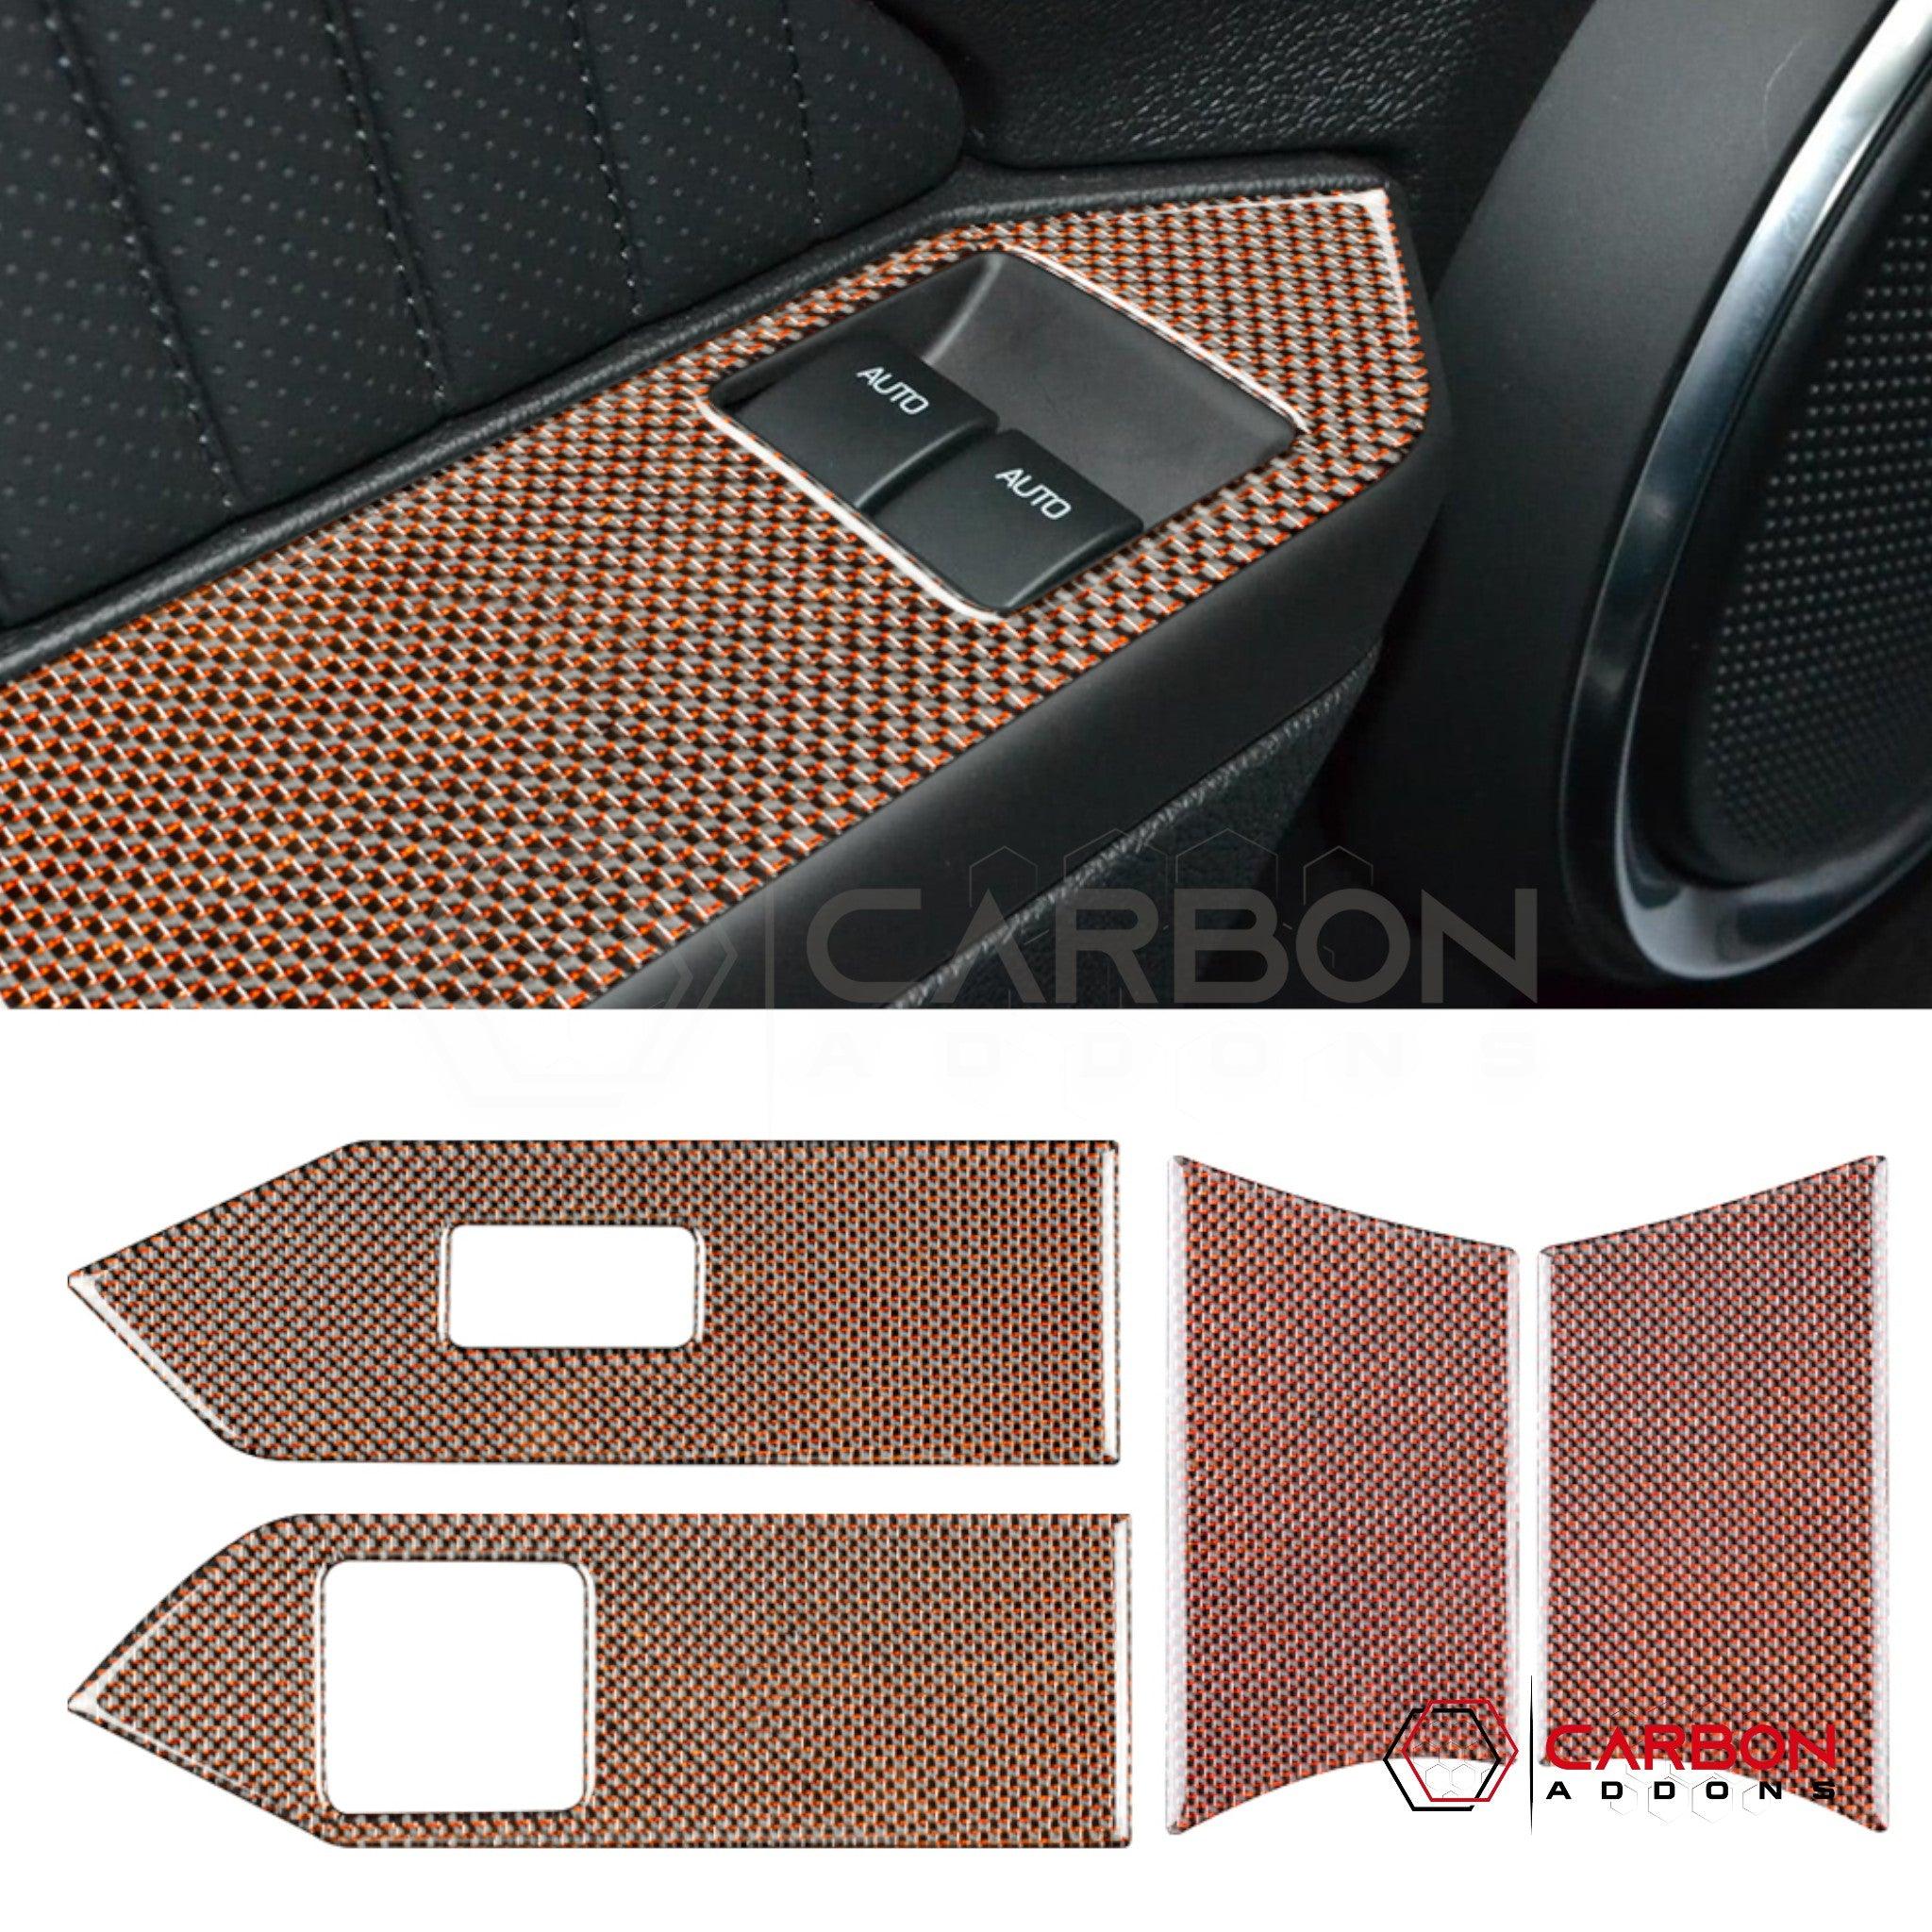 Mustang 2010-2014 Reflective Carbon Fiber Window Switch Trim Overlay - carbonaddons Carbon Fiber Parts, Accessories, Upgrades, Mods